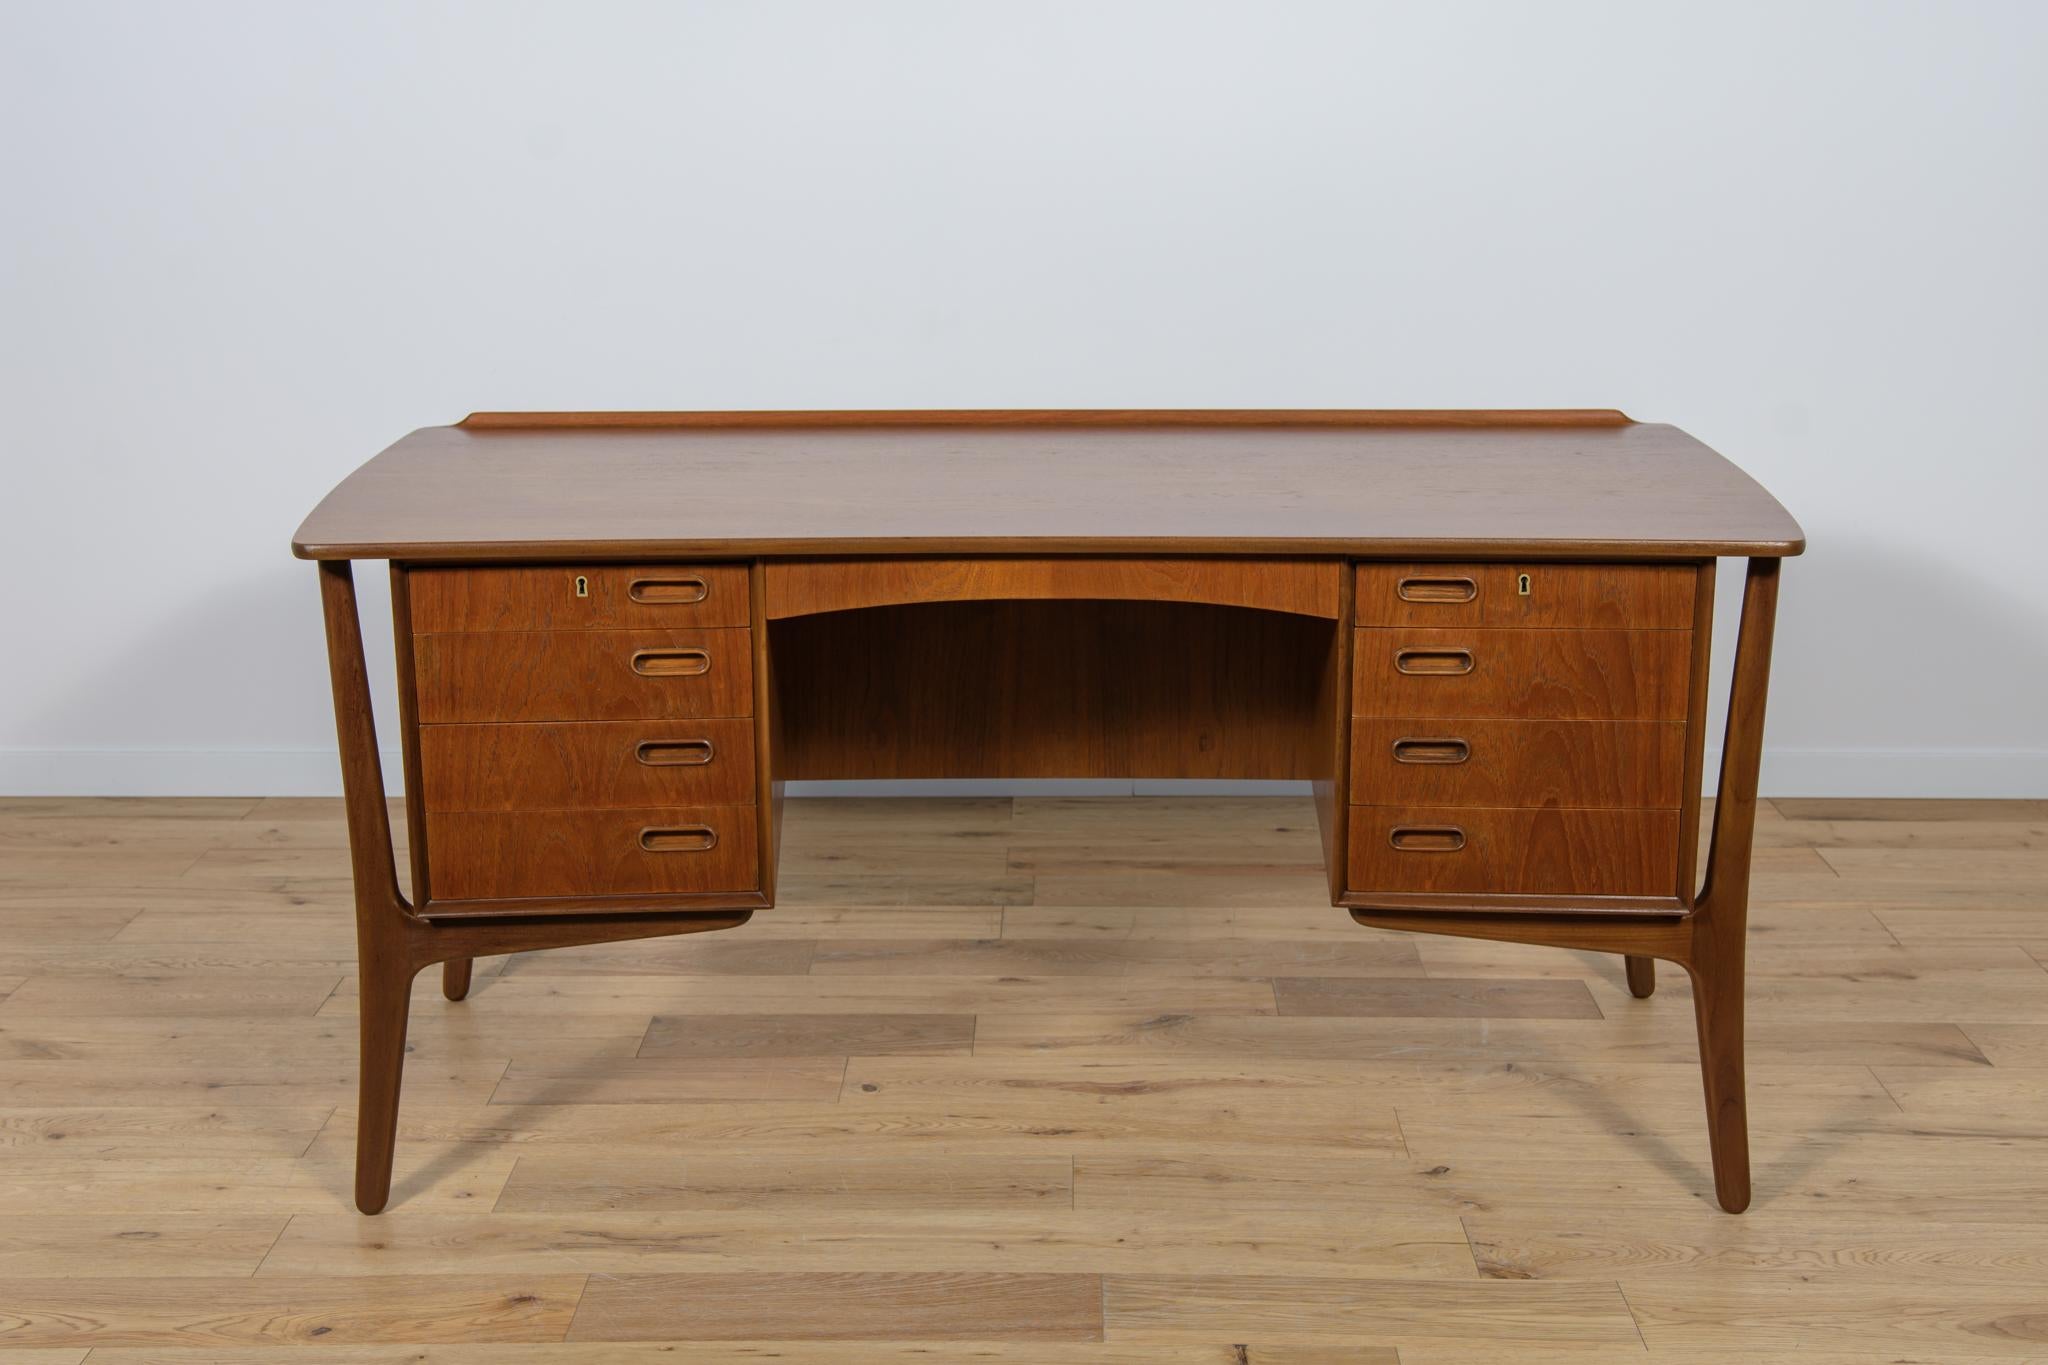 This desk is designed by Svend Åge Madsen and manufactured by h.p. Hansen in Denmark in the 1960s. It is a good example of high quality materials and manufacturing. This is a teak desk with eight drawers and an open shelf with a lockable cabinet at